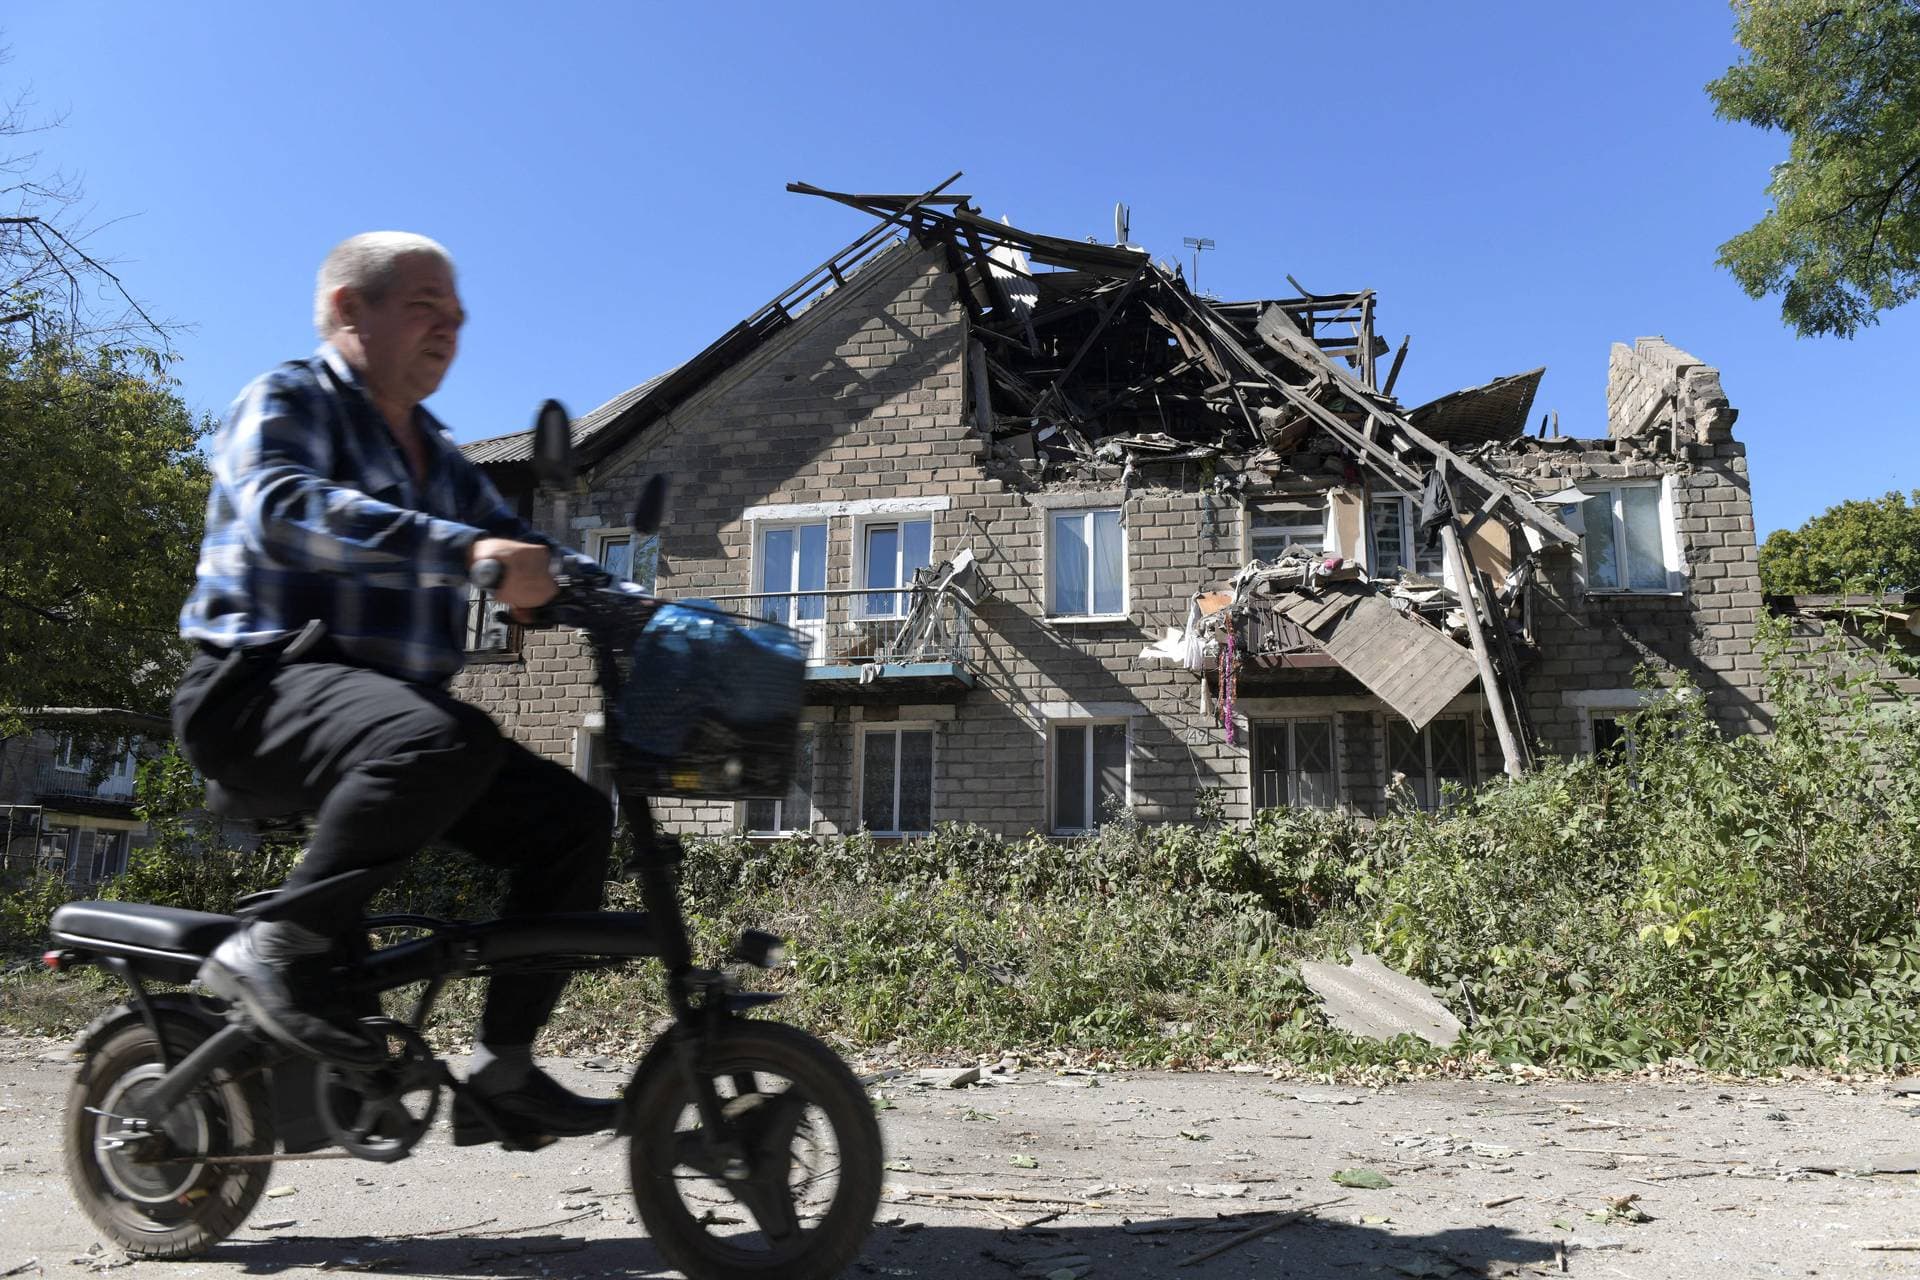 A man drives past a ruined building in Russian-controlled Donetsk after recent shelling.